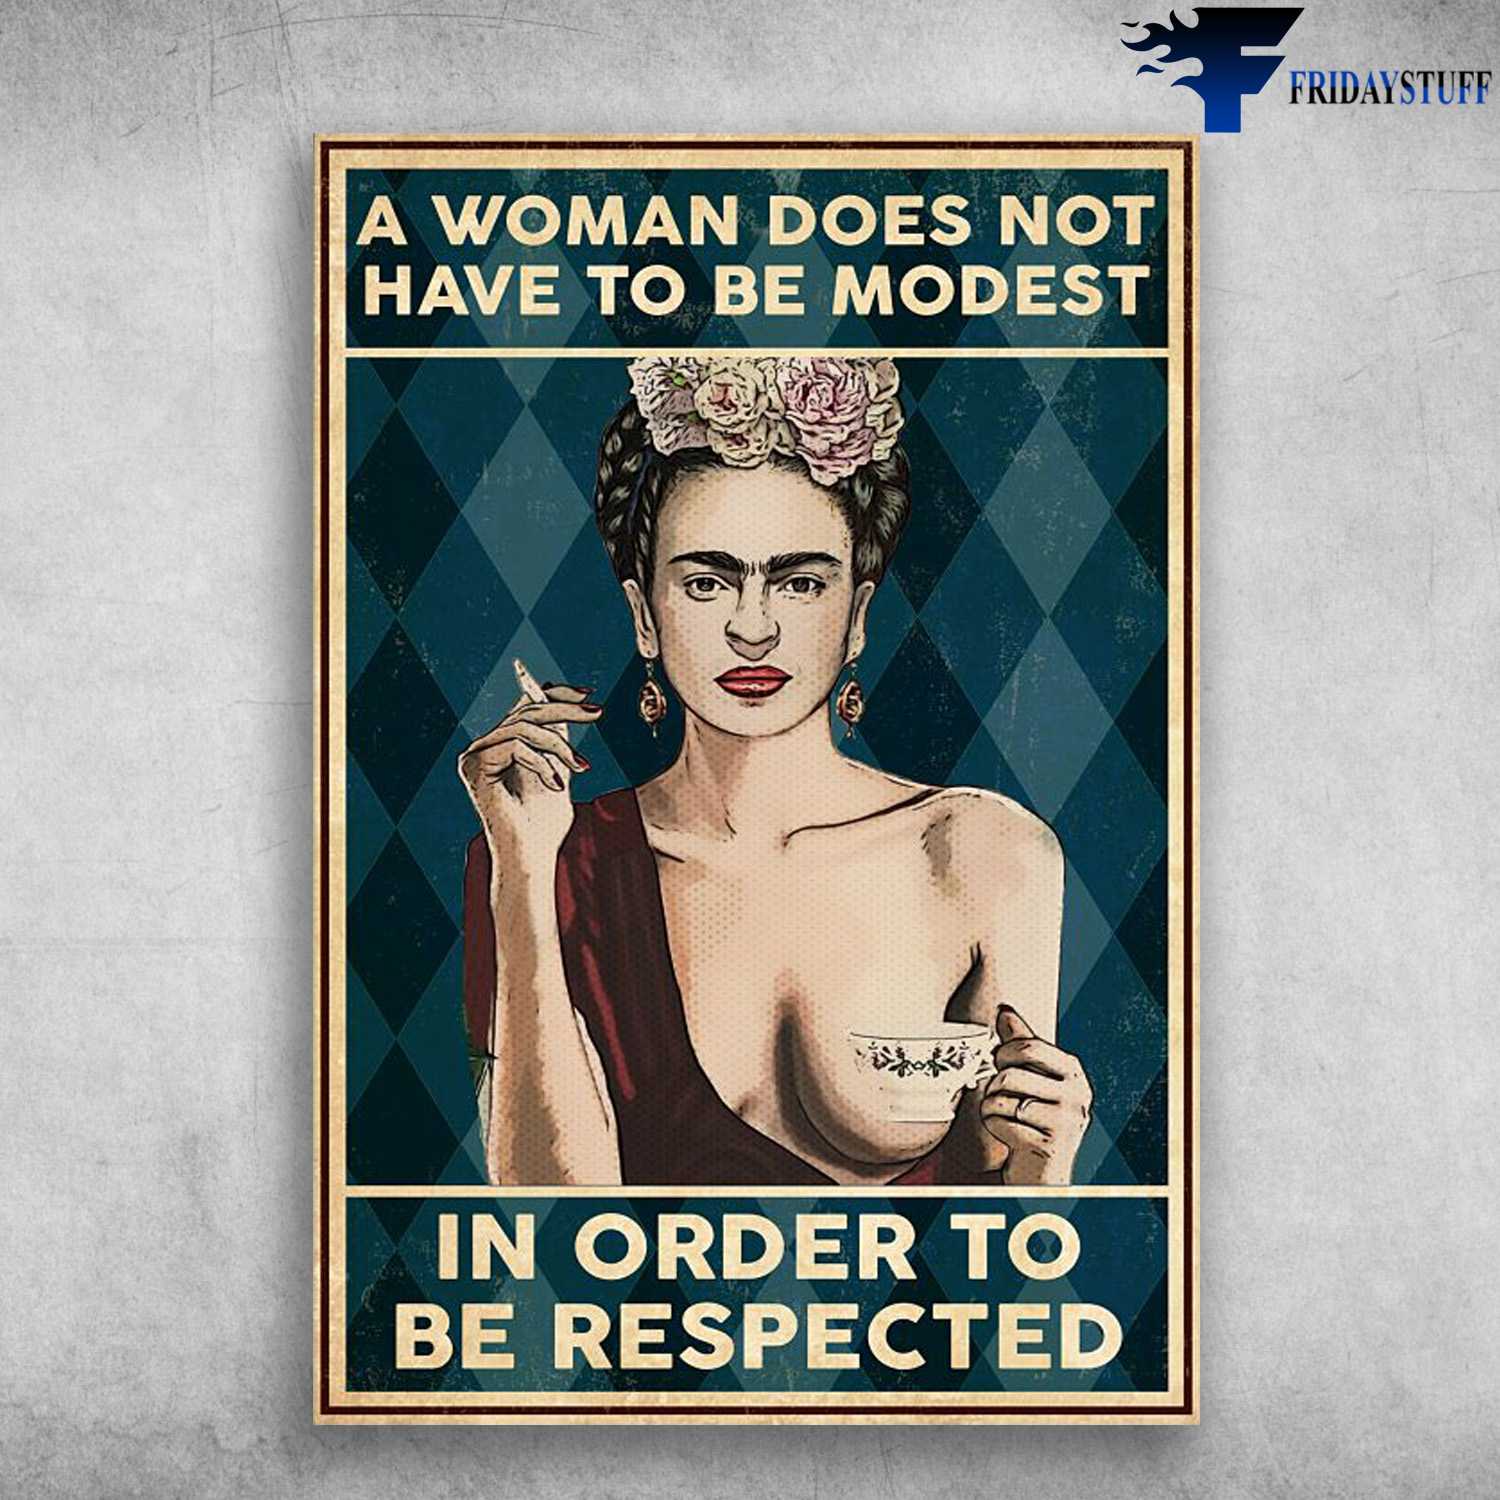 Frida Kahlo - A Woman Does Not Have To Be Modest, In Order To Be Respected